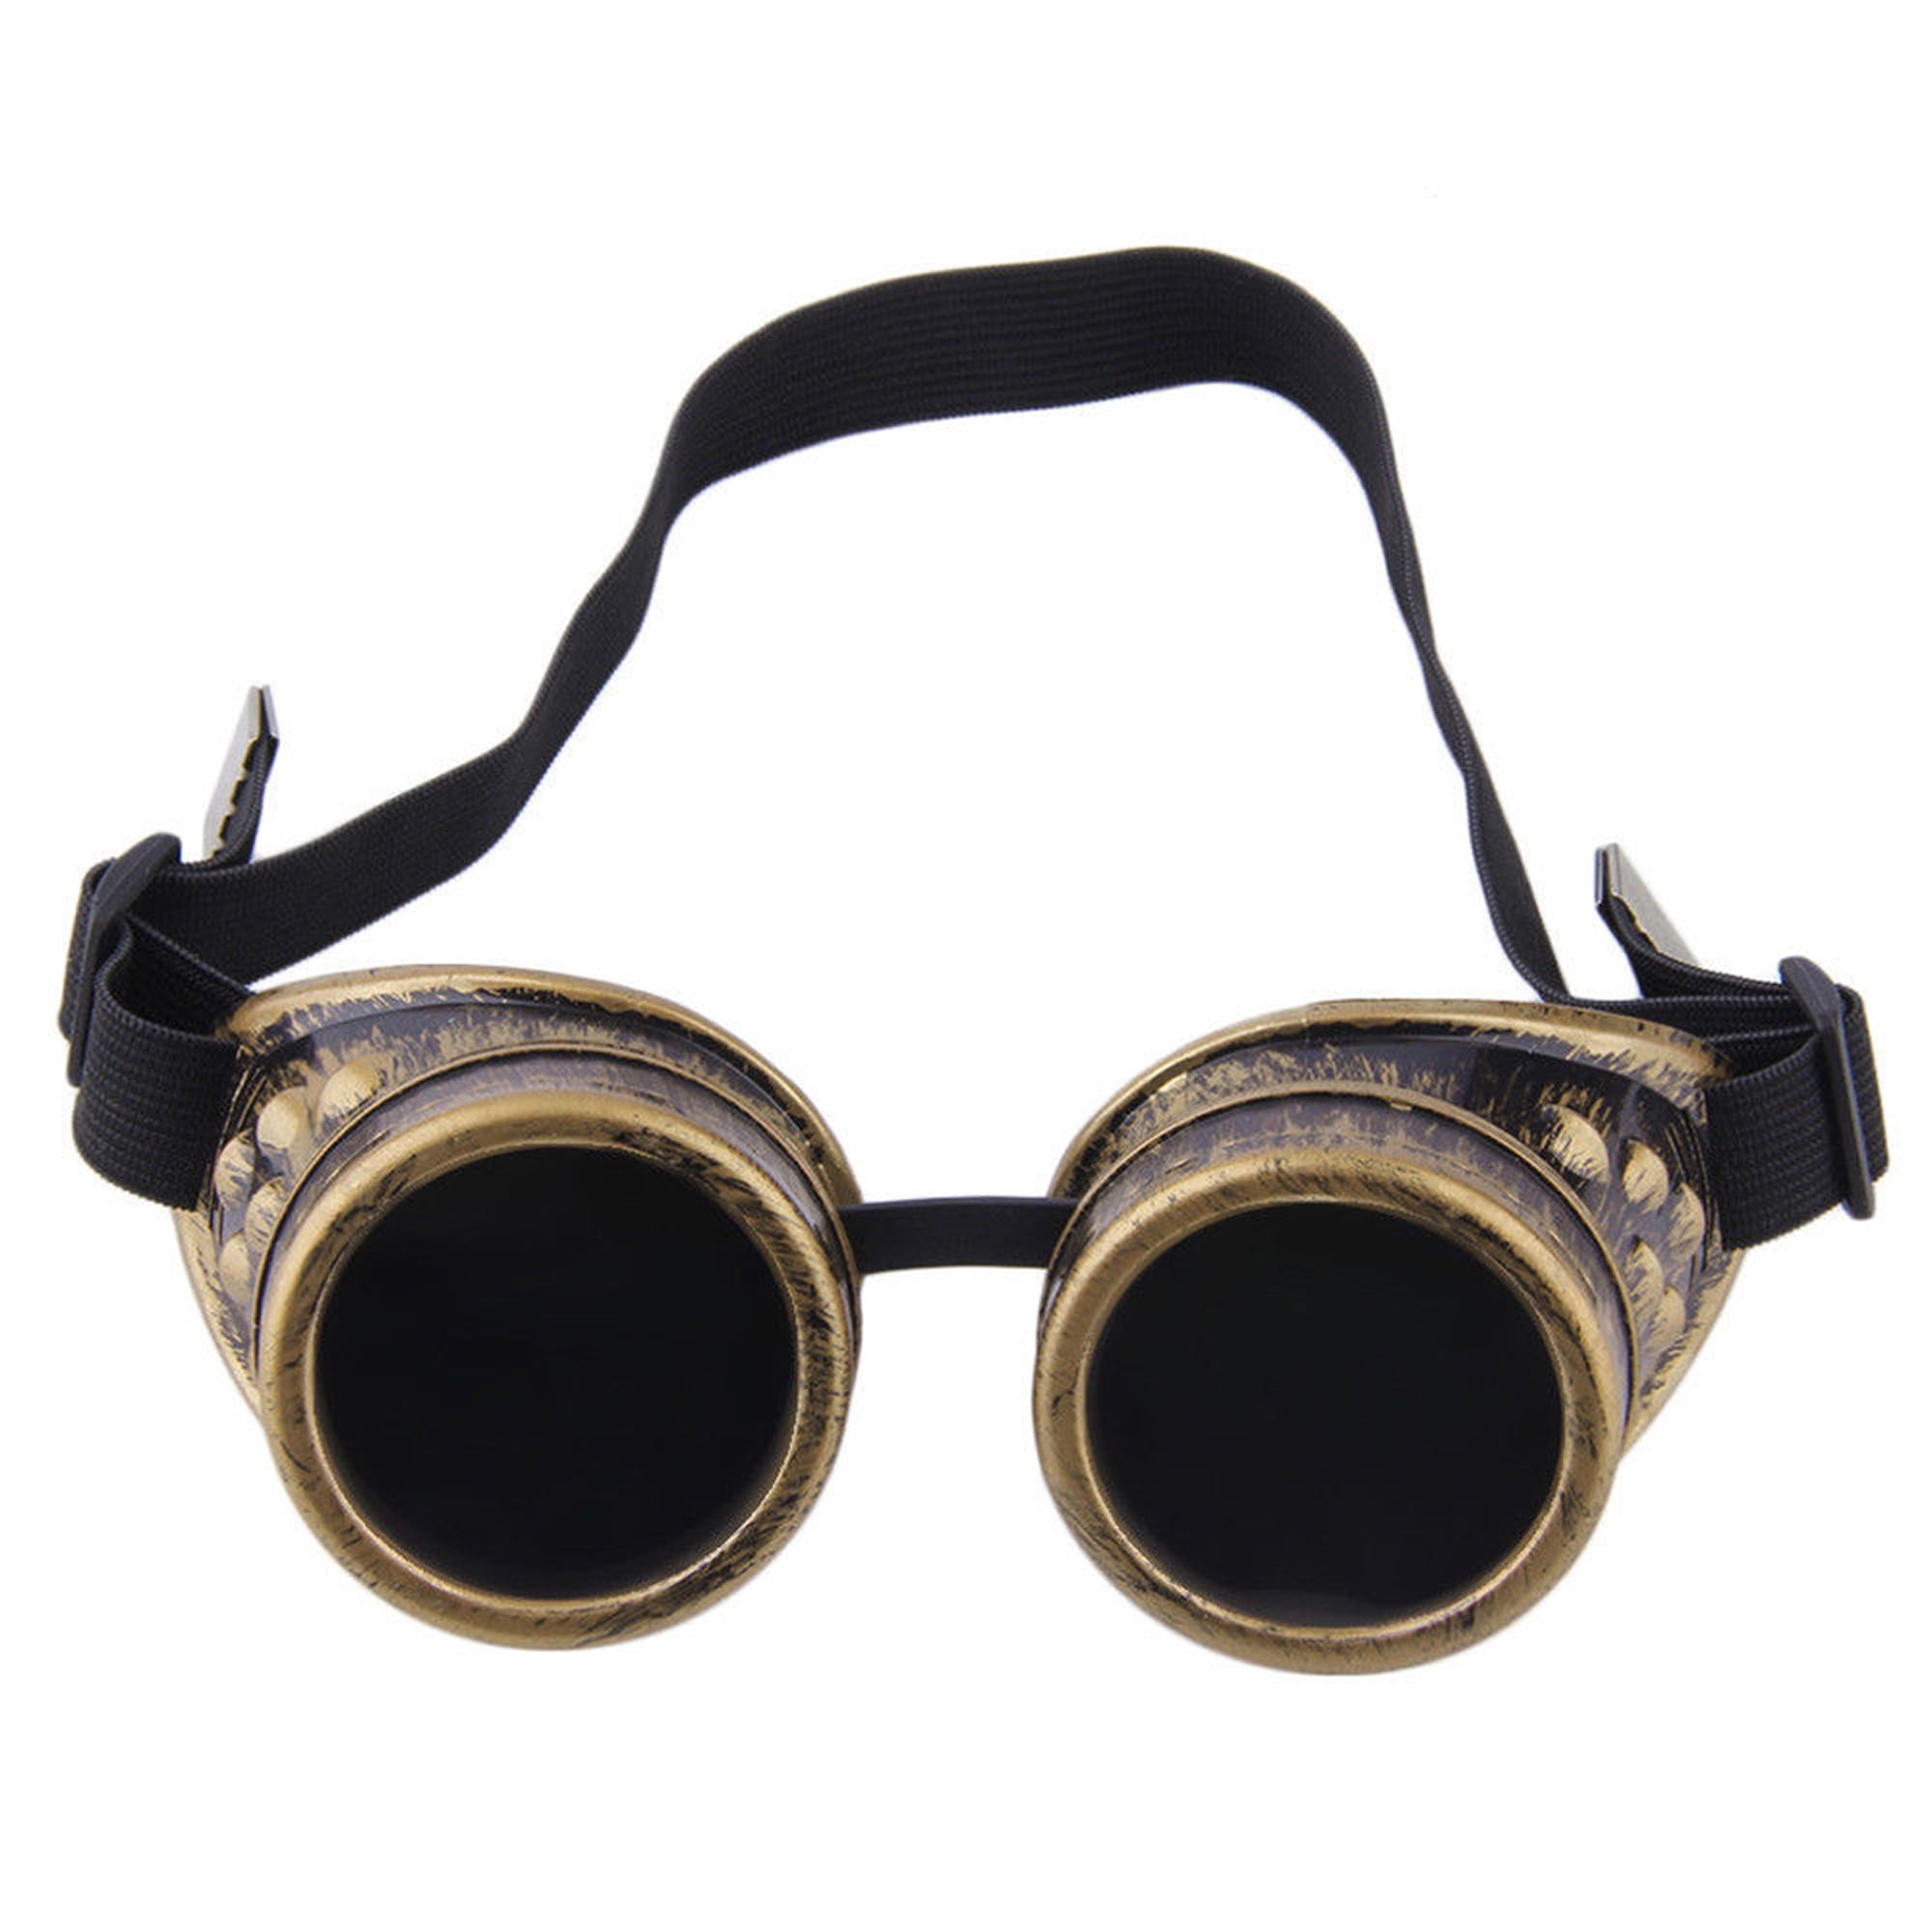 New Vintage Punk Goggles Victorian Welding Cosplay Cyber Punk Gothic PC Lens USA 